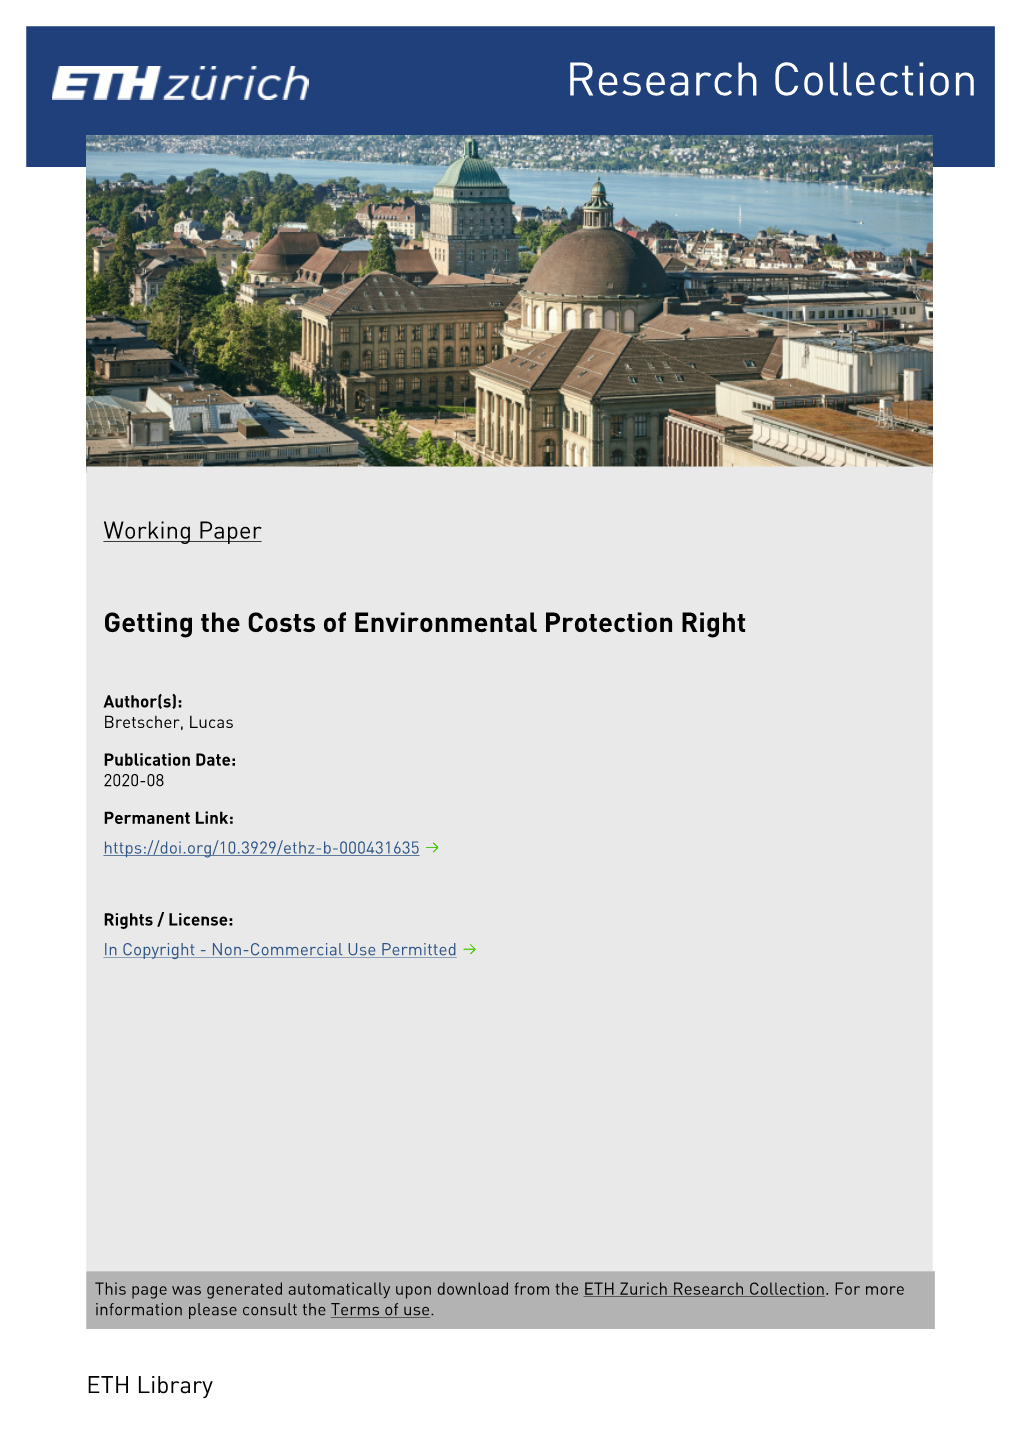 Getting the Costs of Environmental Protection Right